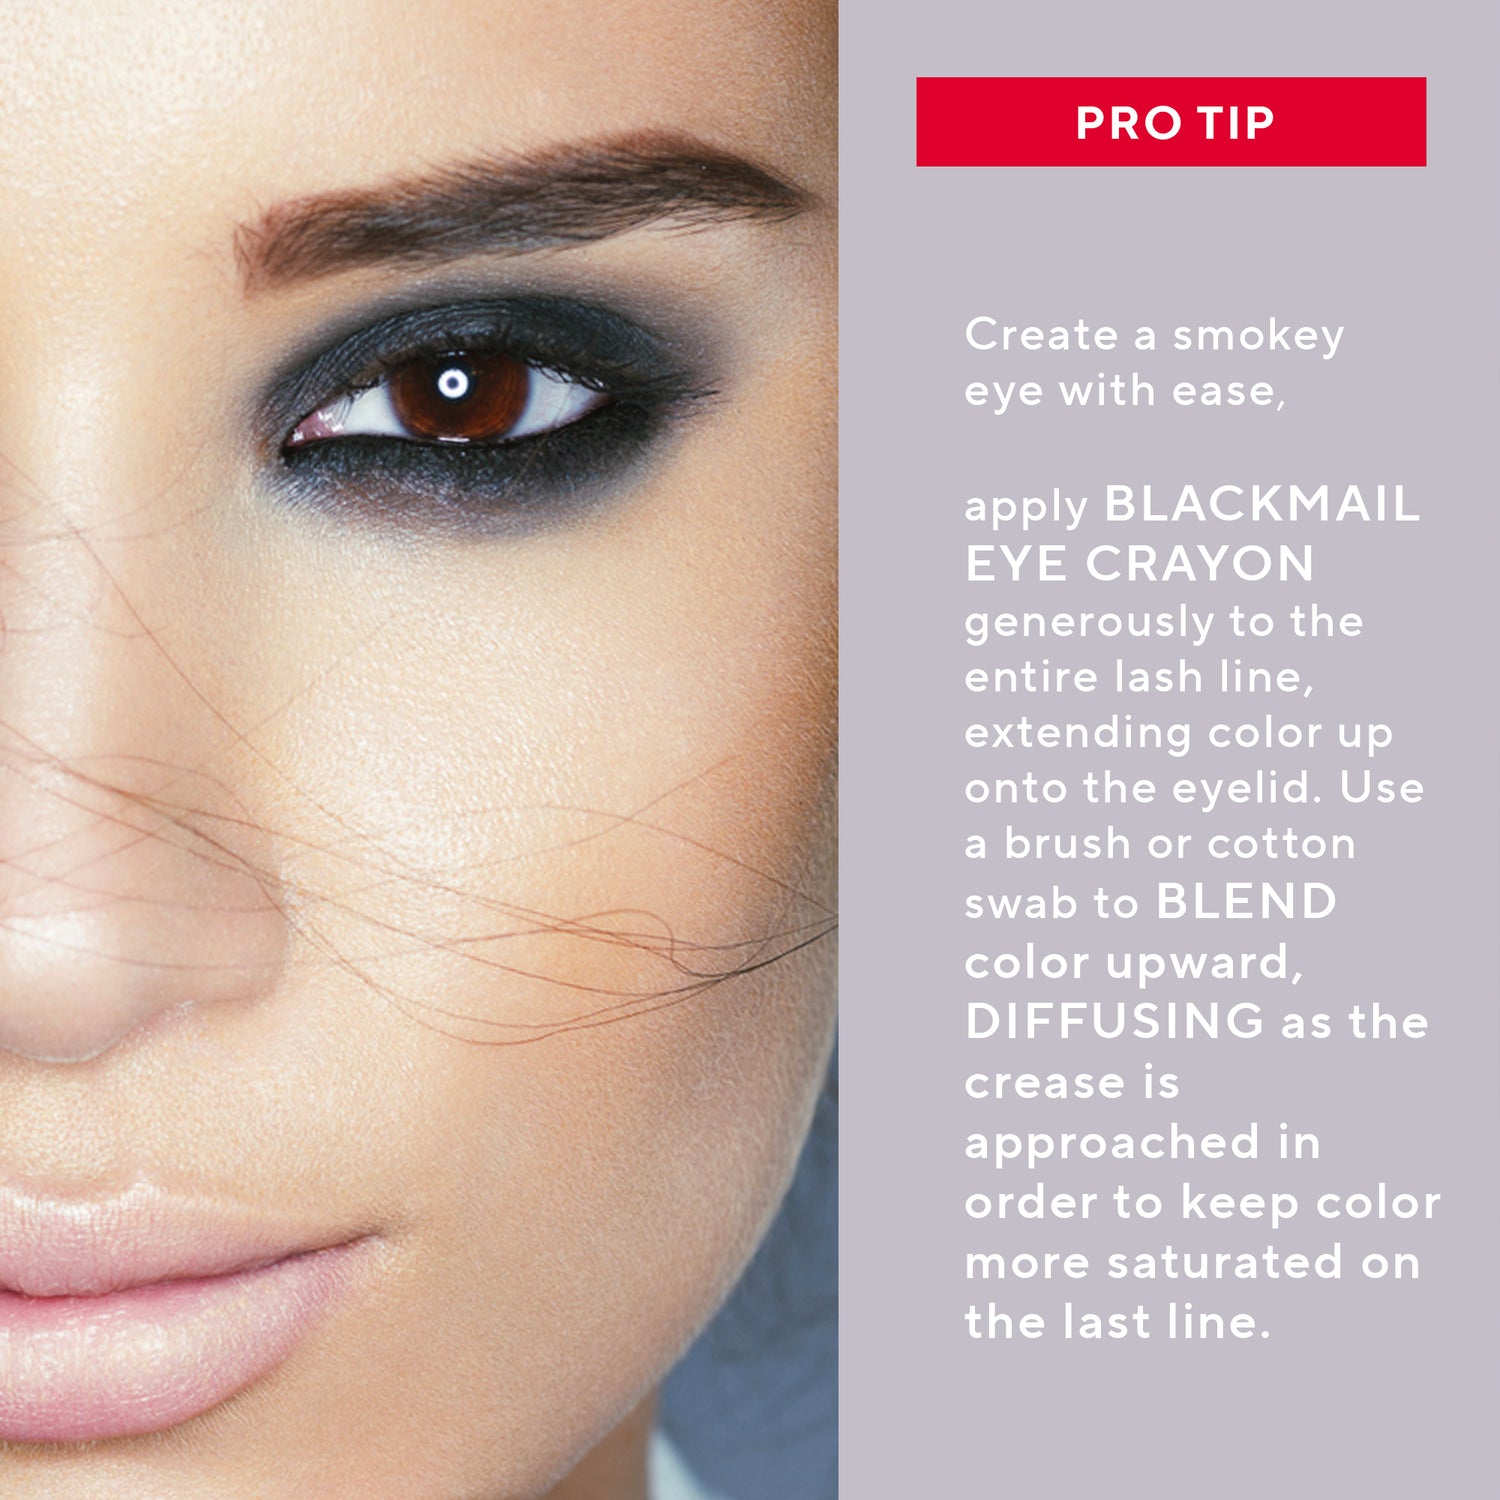 Mirabella Beauty Pro Tip for Applying Blackmail Eye Crayon to Line and Shade Eyes for Smoky Eye